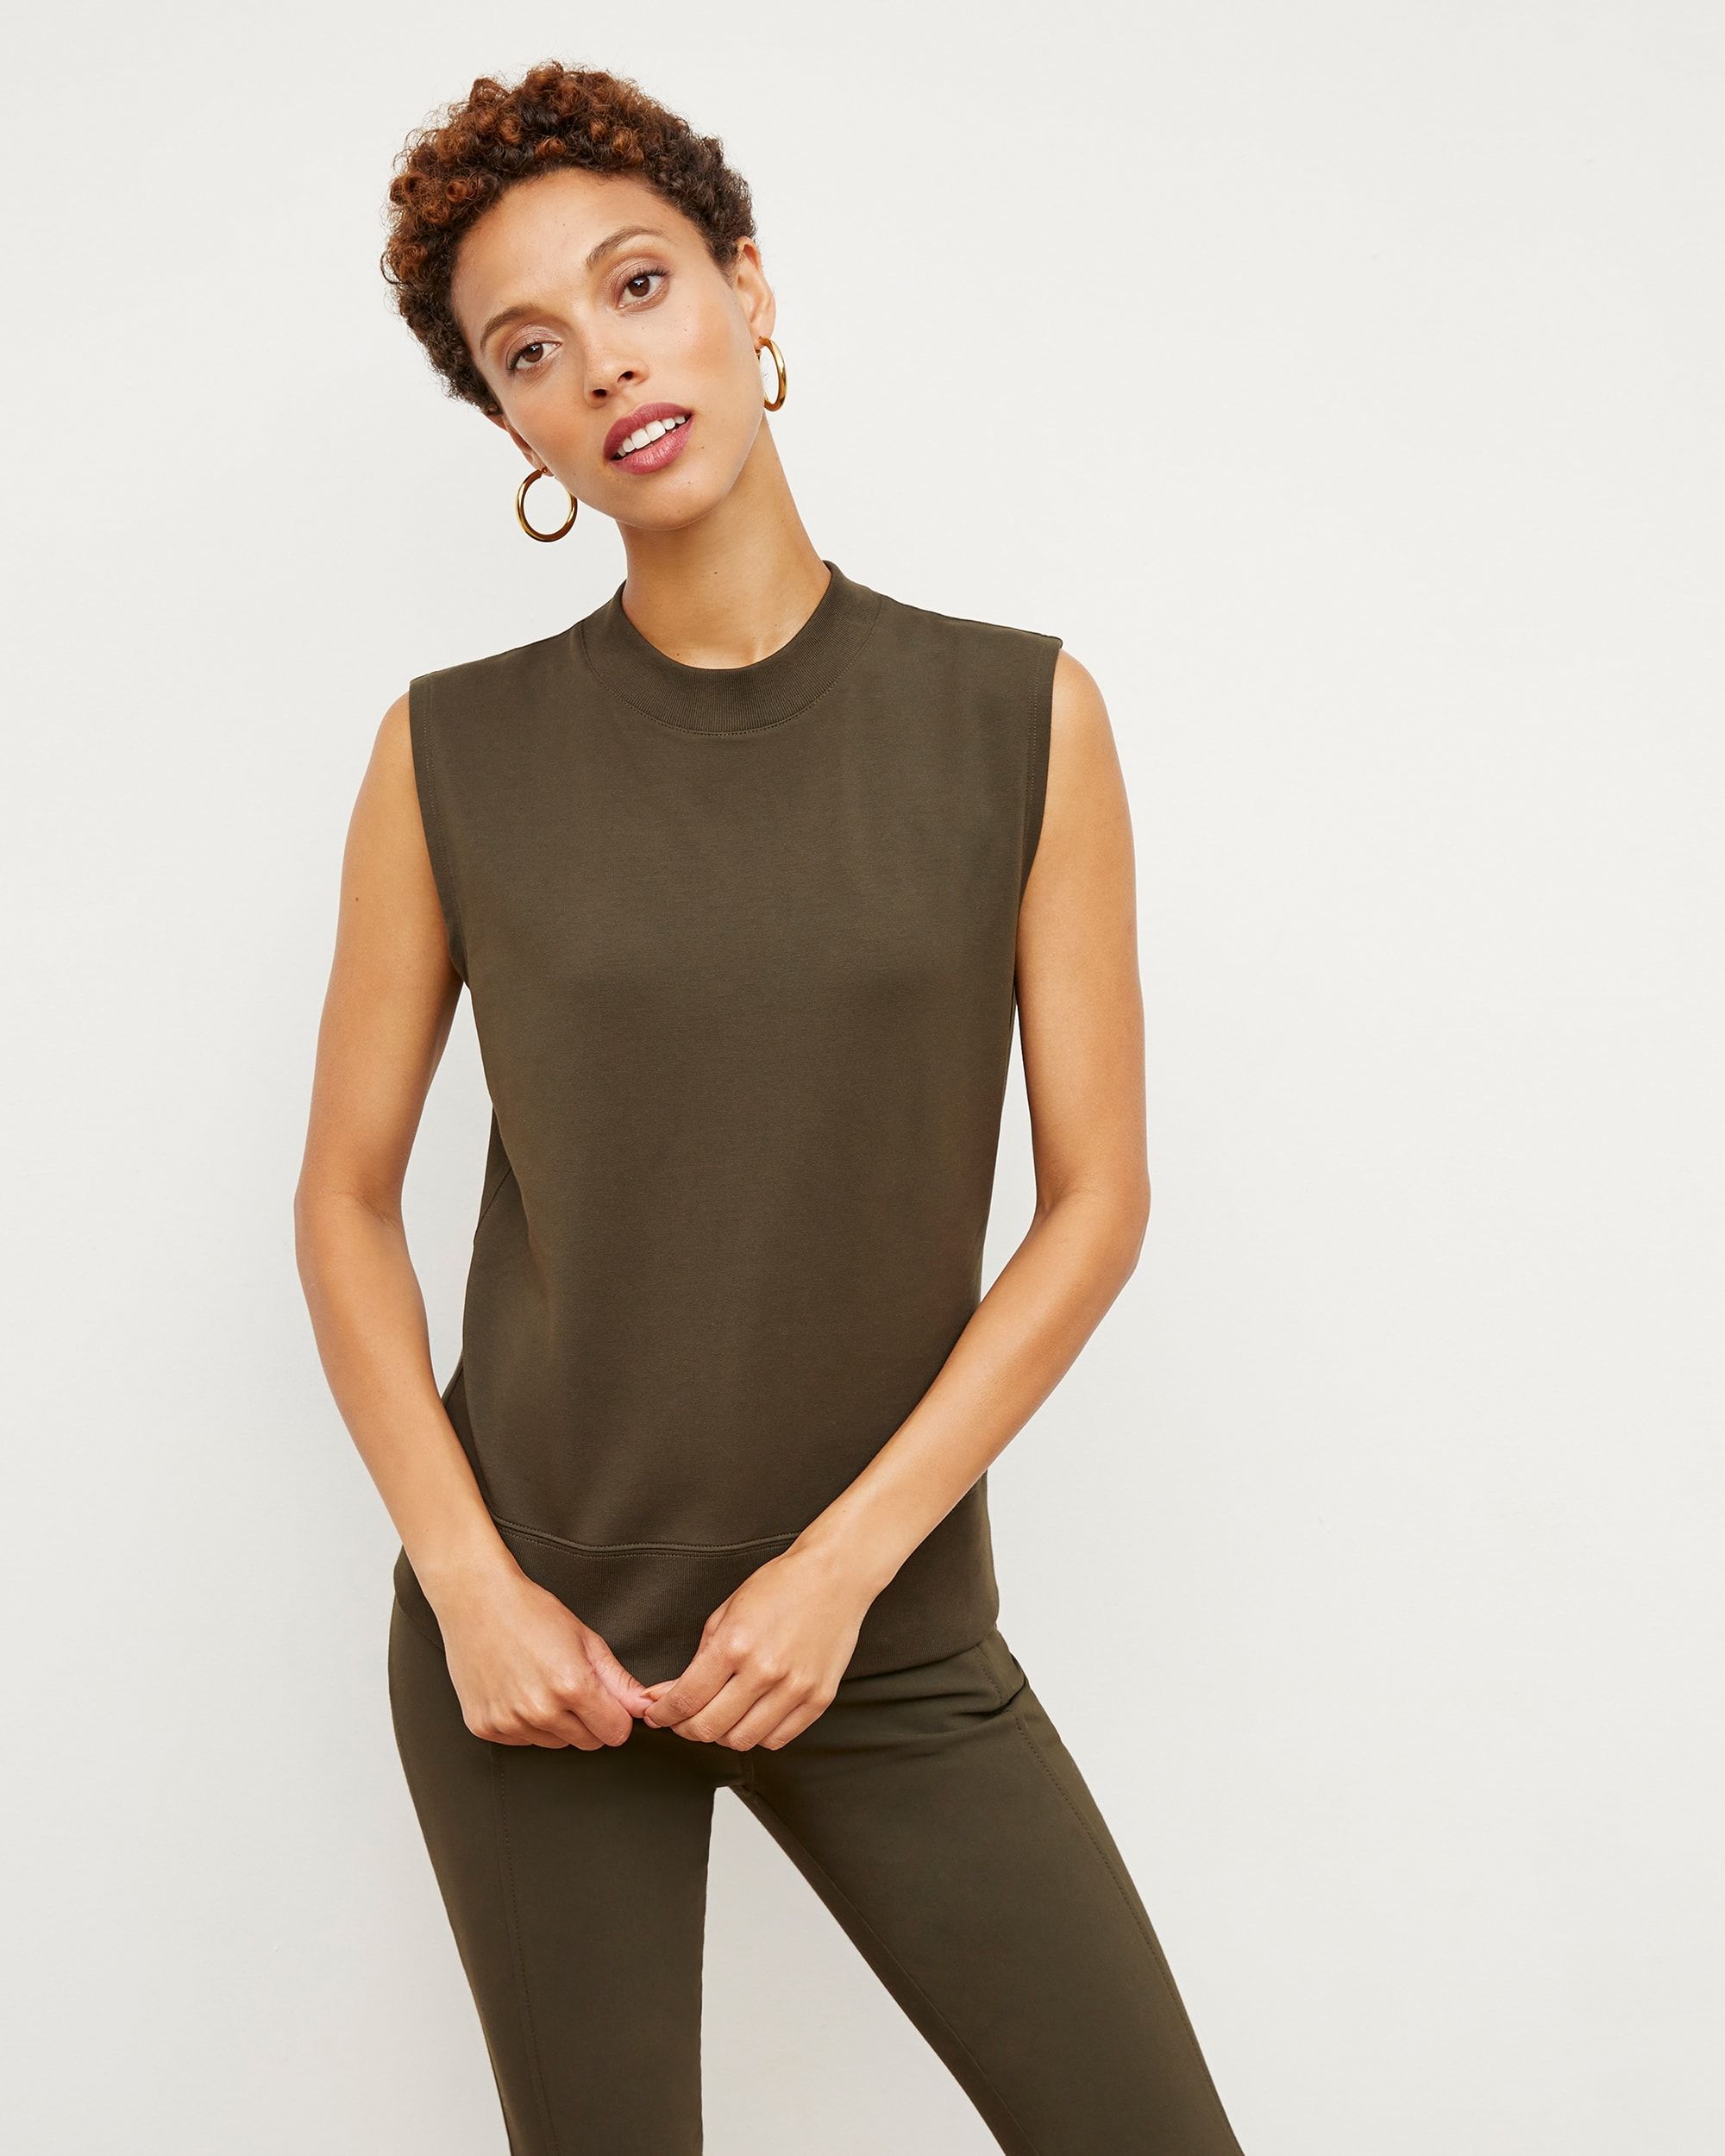 The Toni Top—Light French Terry | MM LaFleur